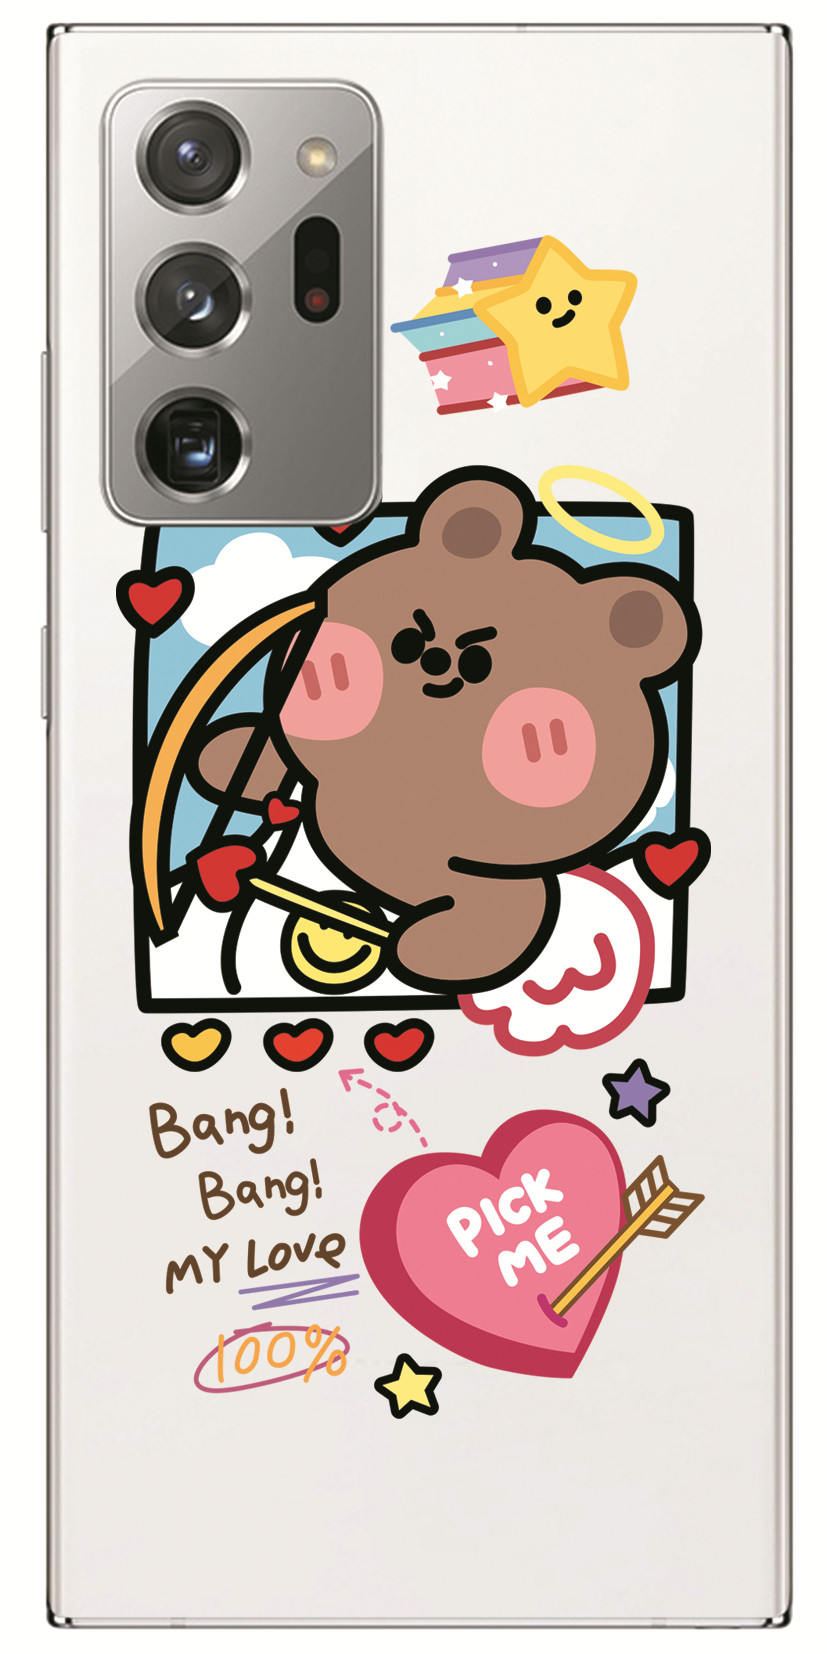 Samsung Galaxy Note 20 Ultra 5G/Note 8 9 10+ Pro INS Cute Cartoon Work hard Brown bear Clear Soft Silicone TPU Phone Casing Lovely label Graffiti Case Back Cover Couple